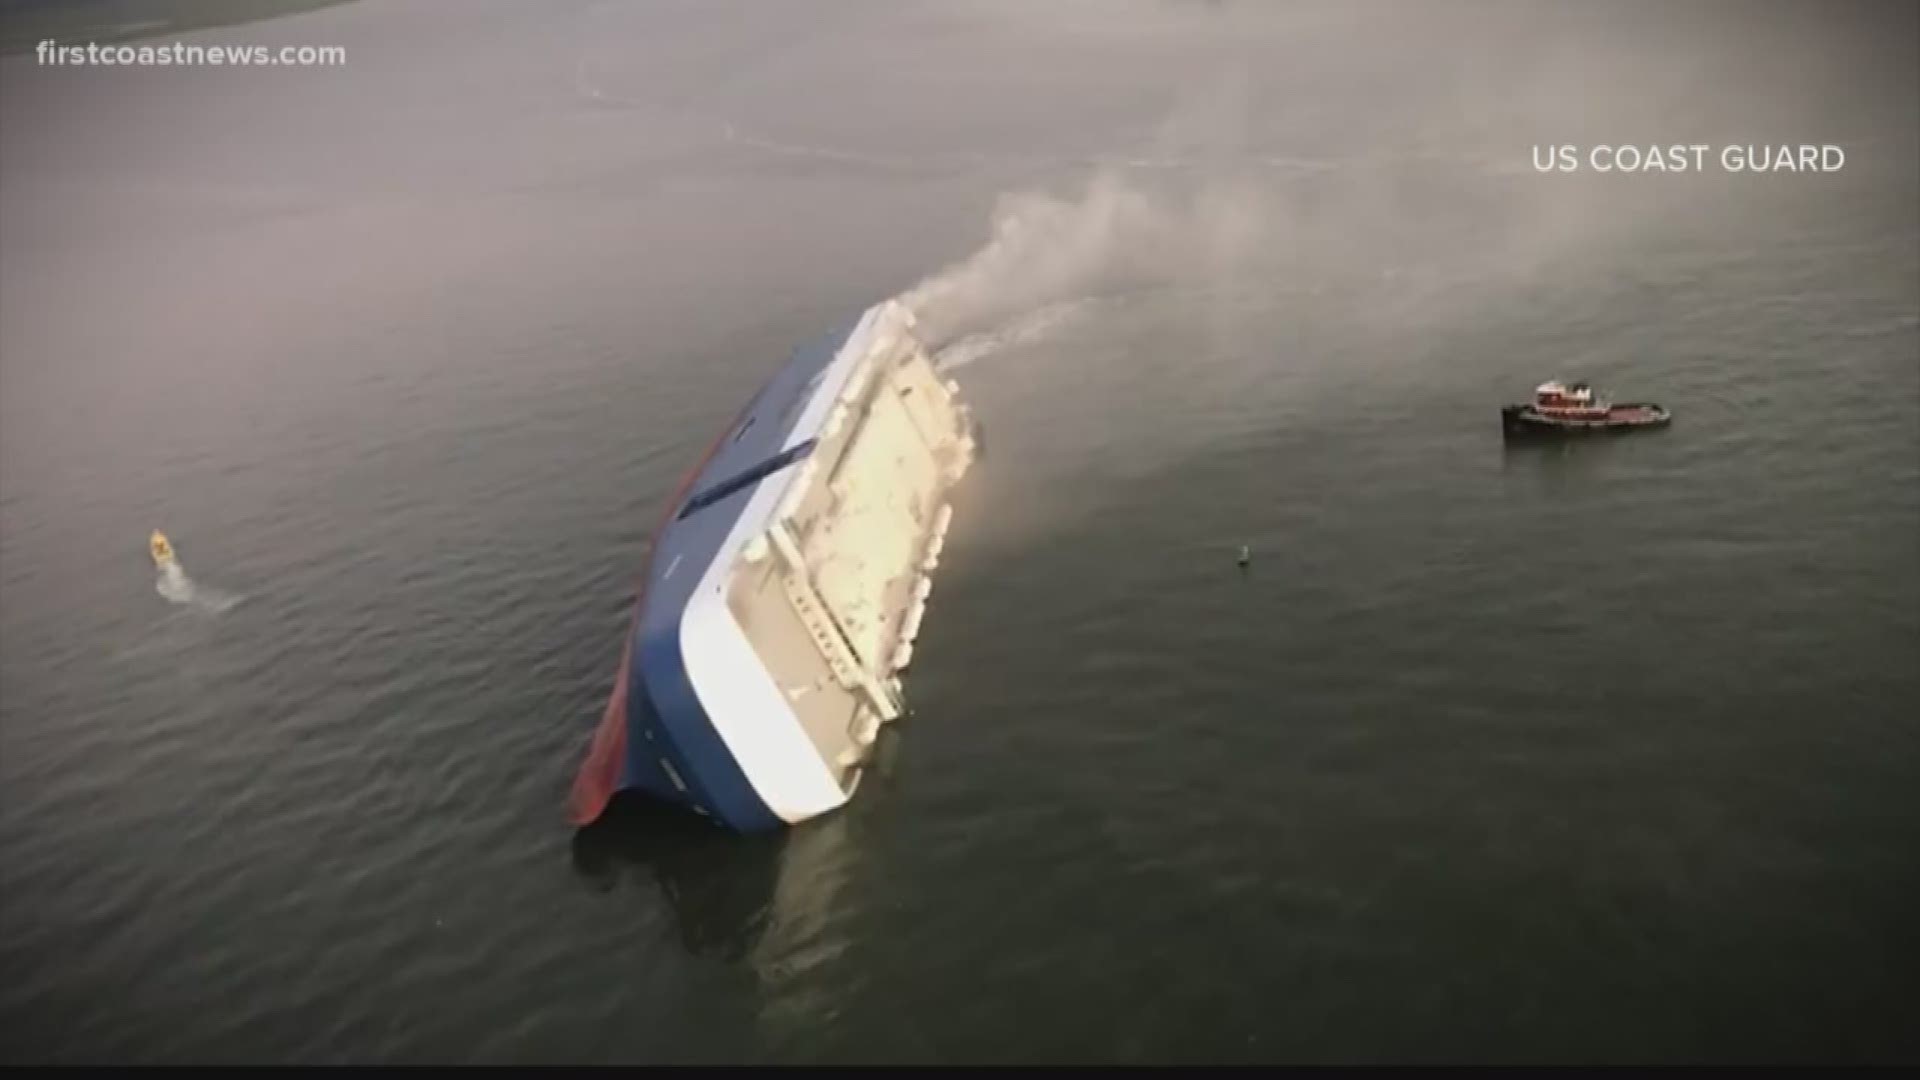 The Golden Ray, which is a vehicle carrier vessel containing 24 crew members, overturned Sunday morning after leaving the Port of Brunswick.